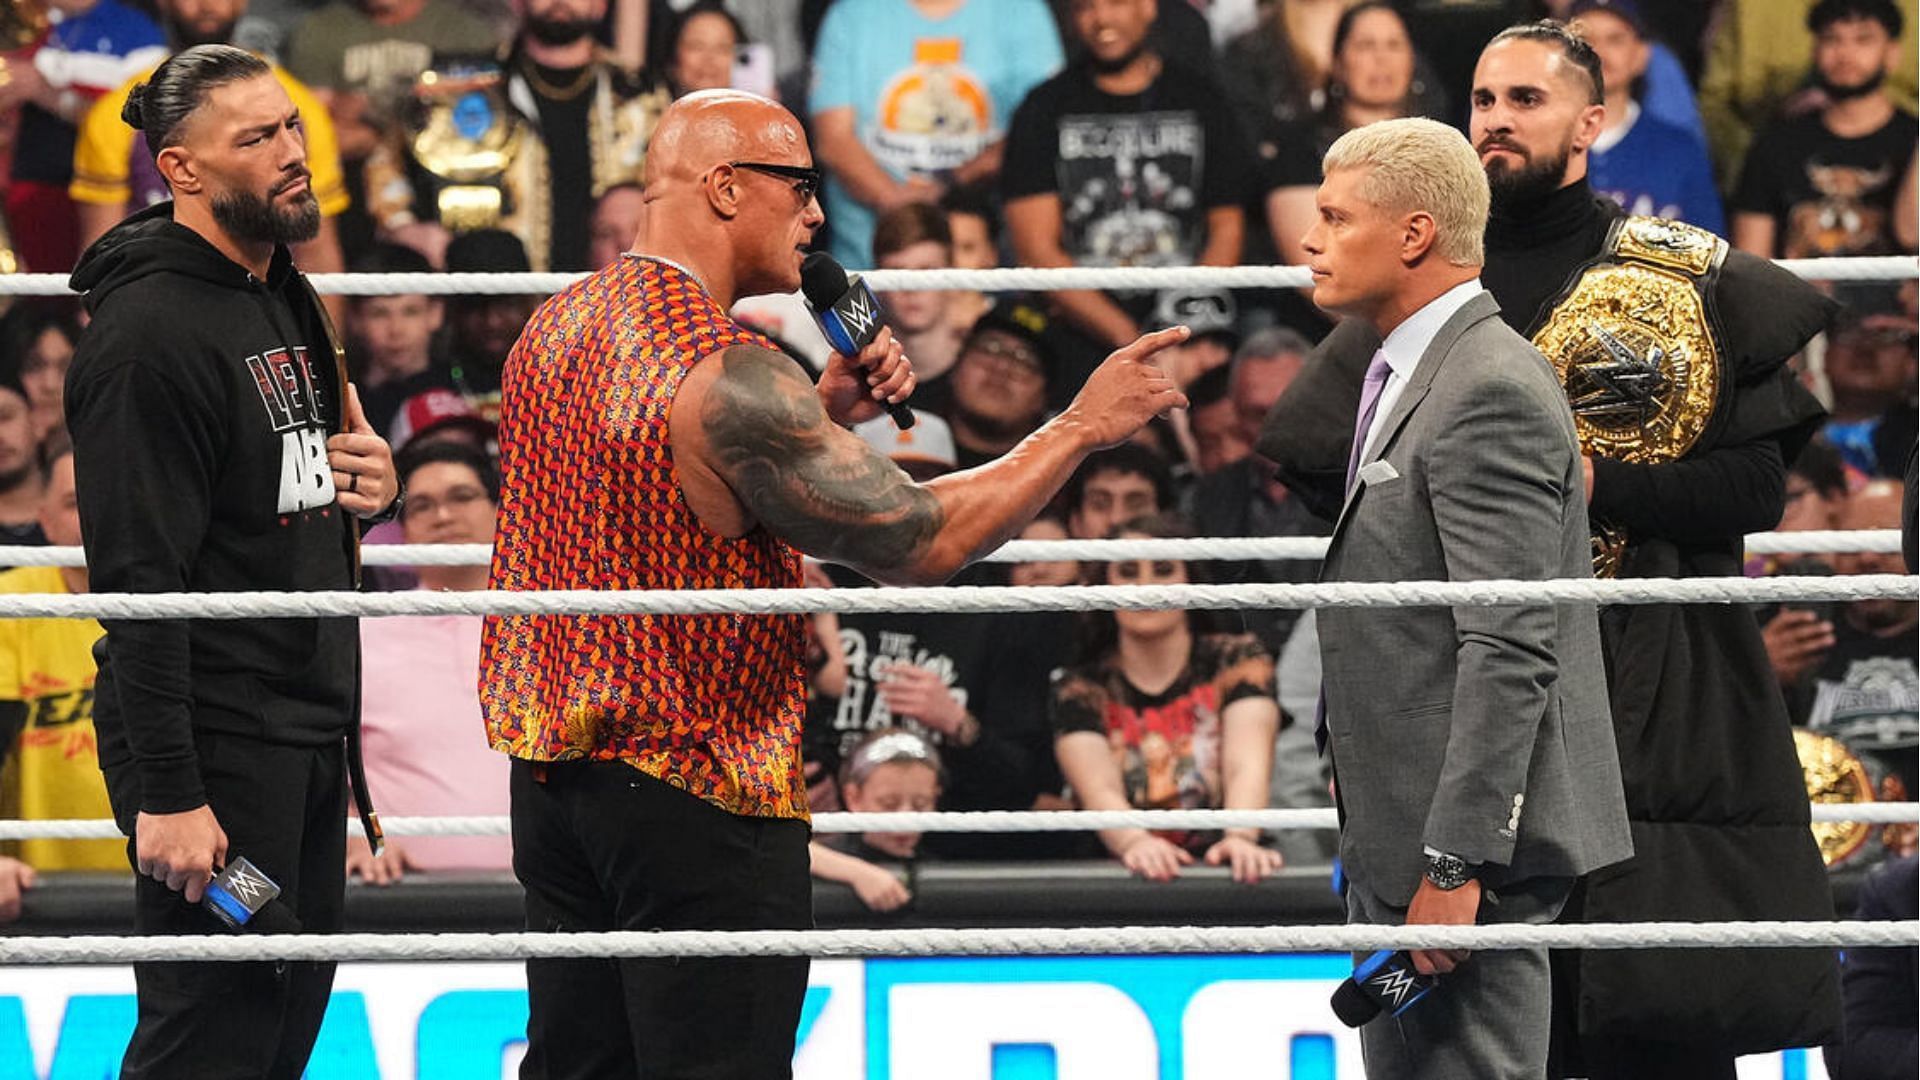 The Rock has some plans for Cody Rhodes and Seth Rollins